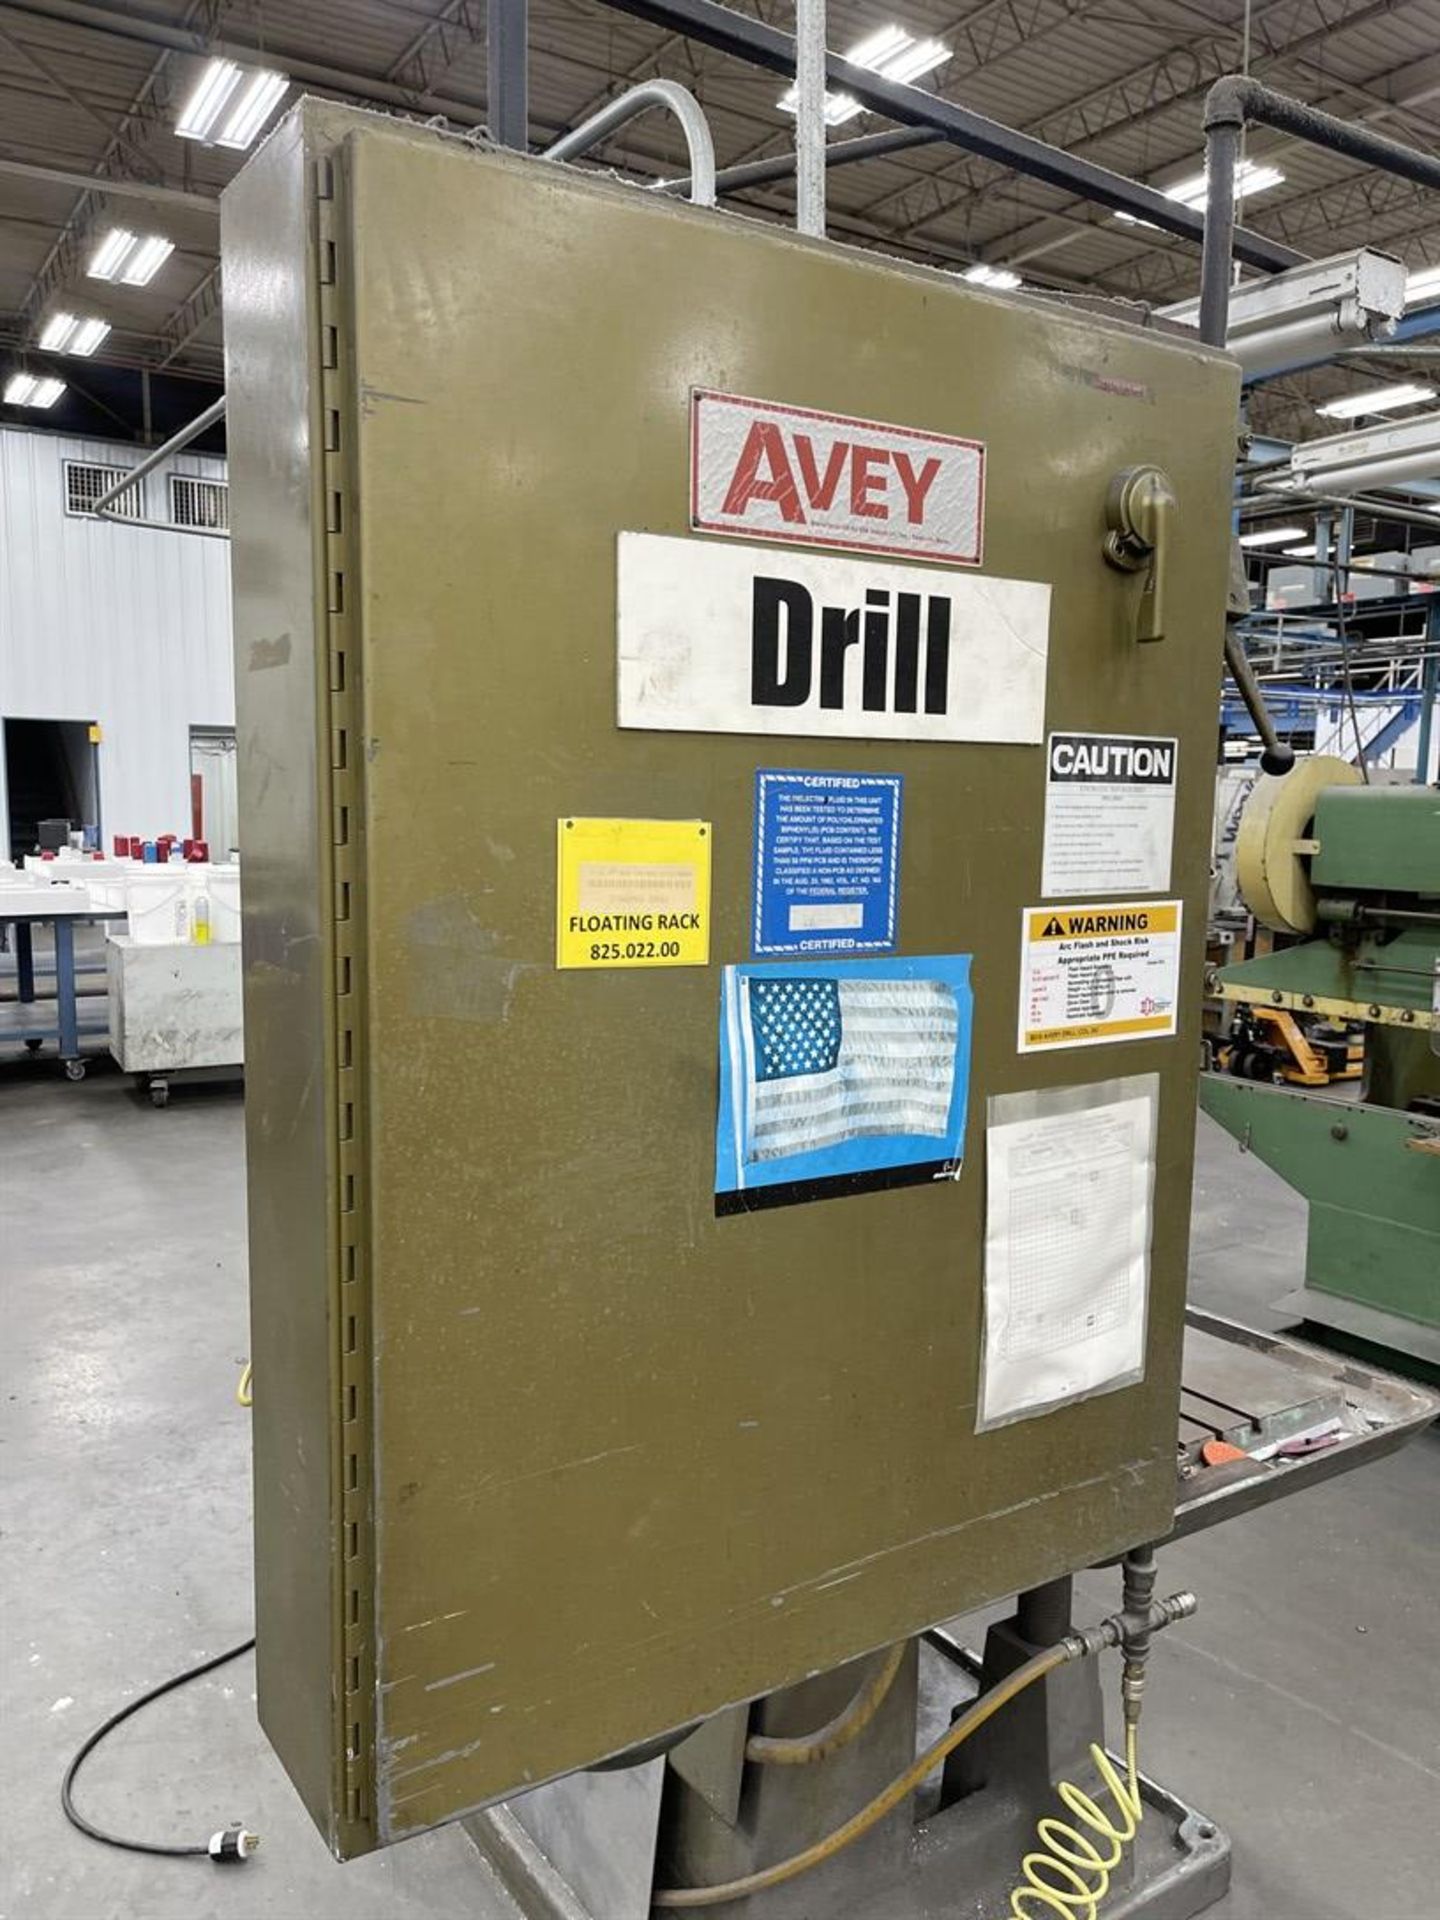 AVEY 2VSA 4-Spindle Gang Drill, s/n A89060 - Image 4 of 6